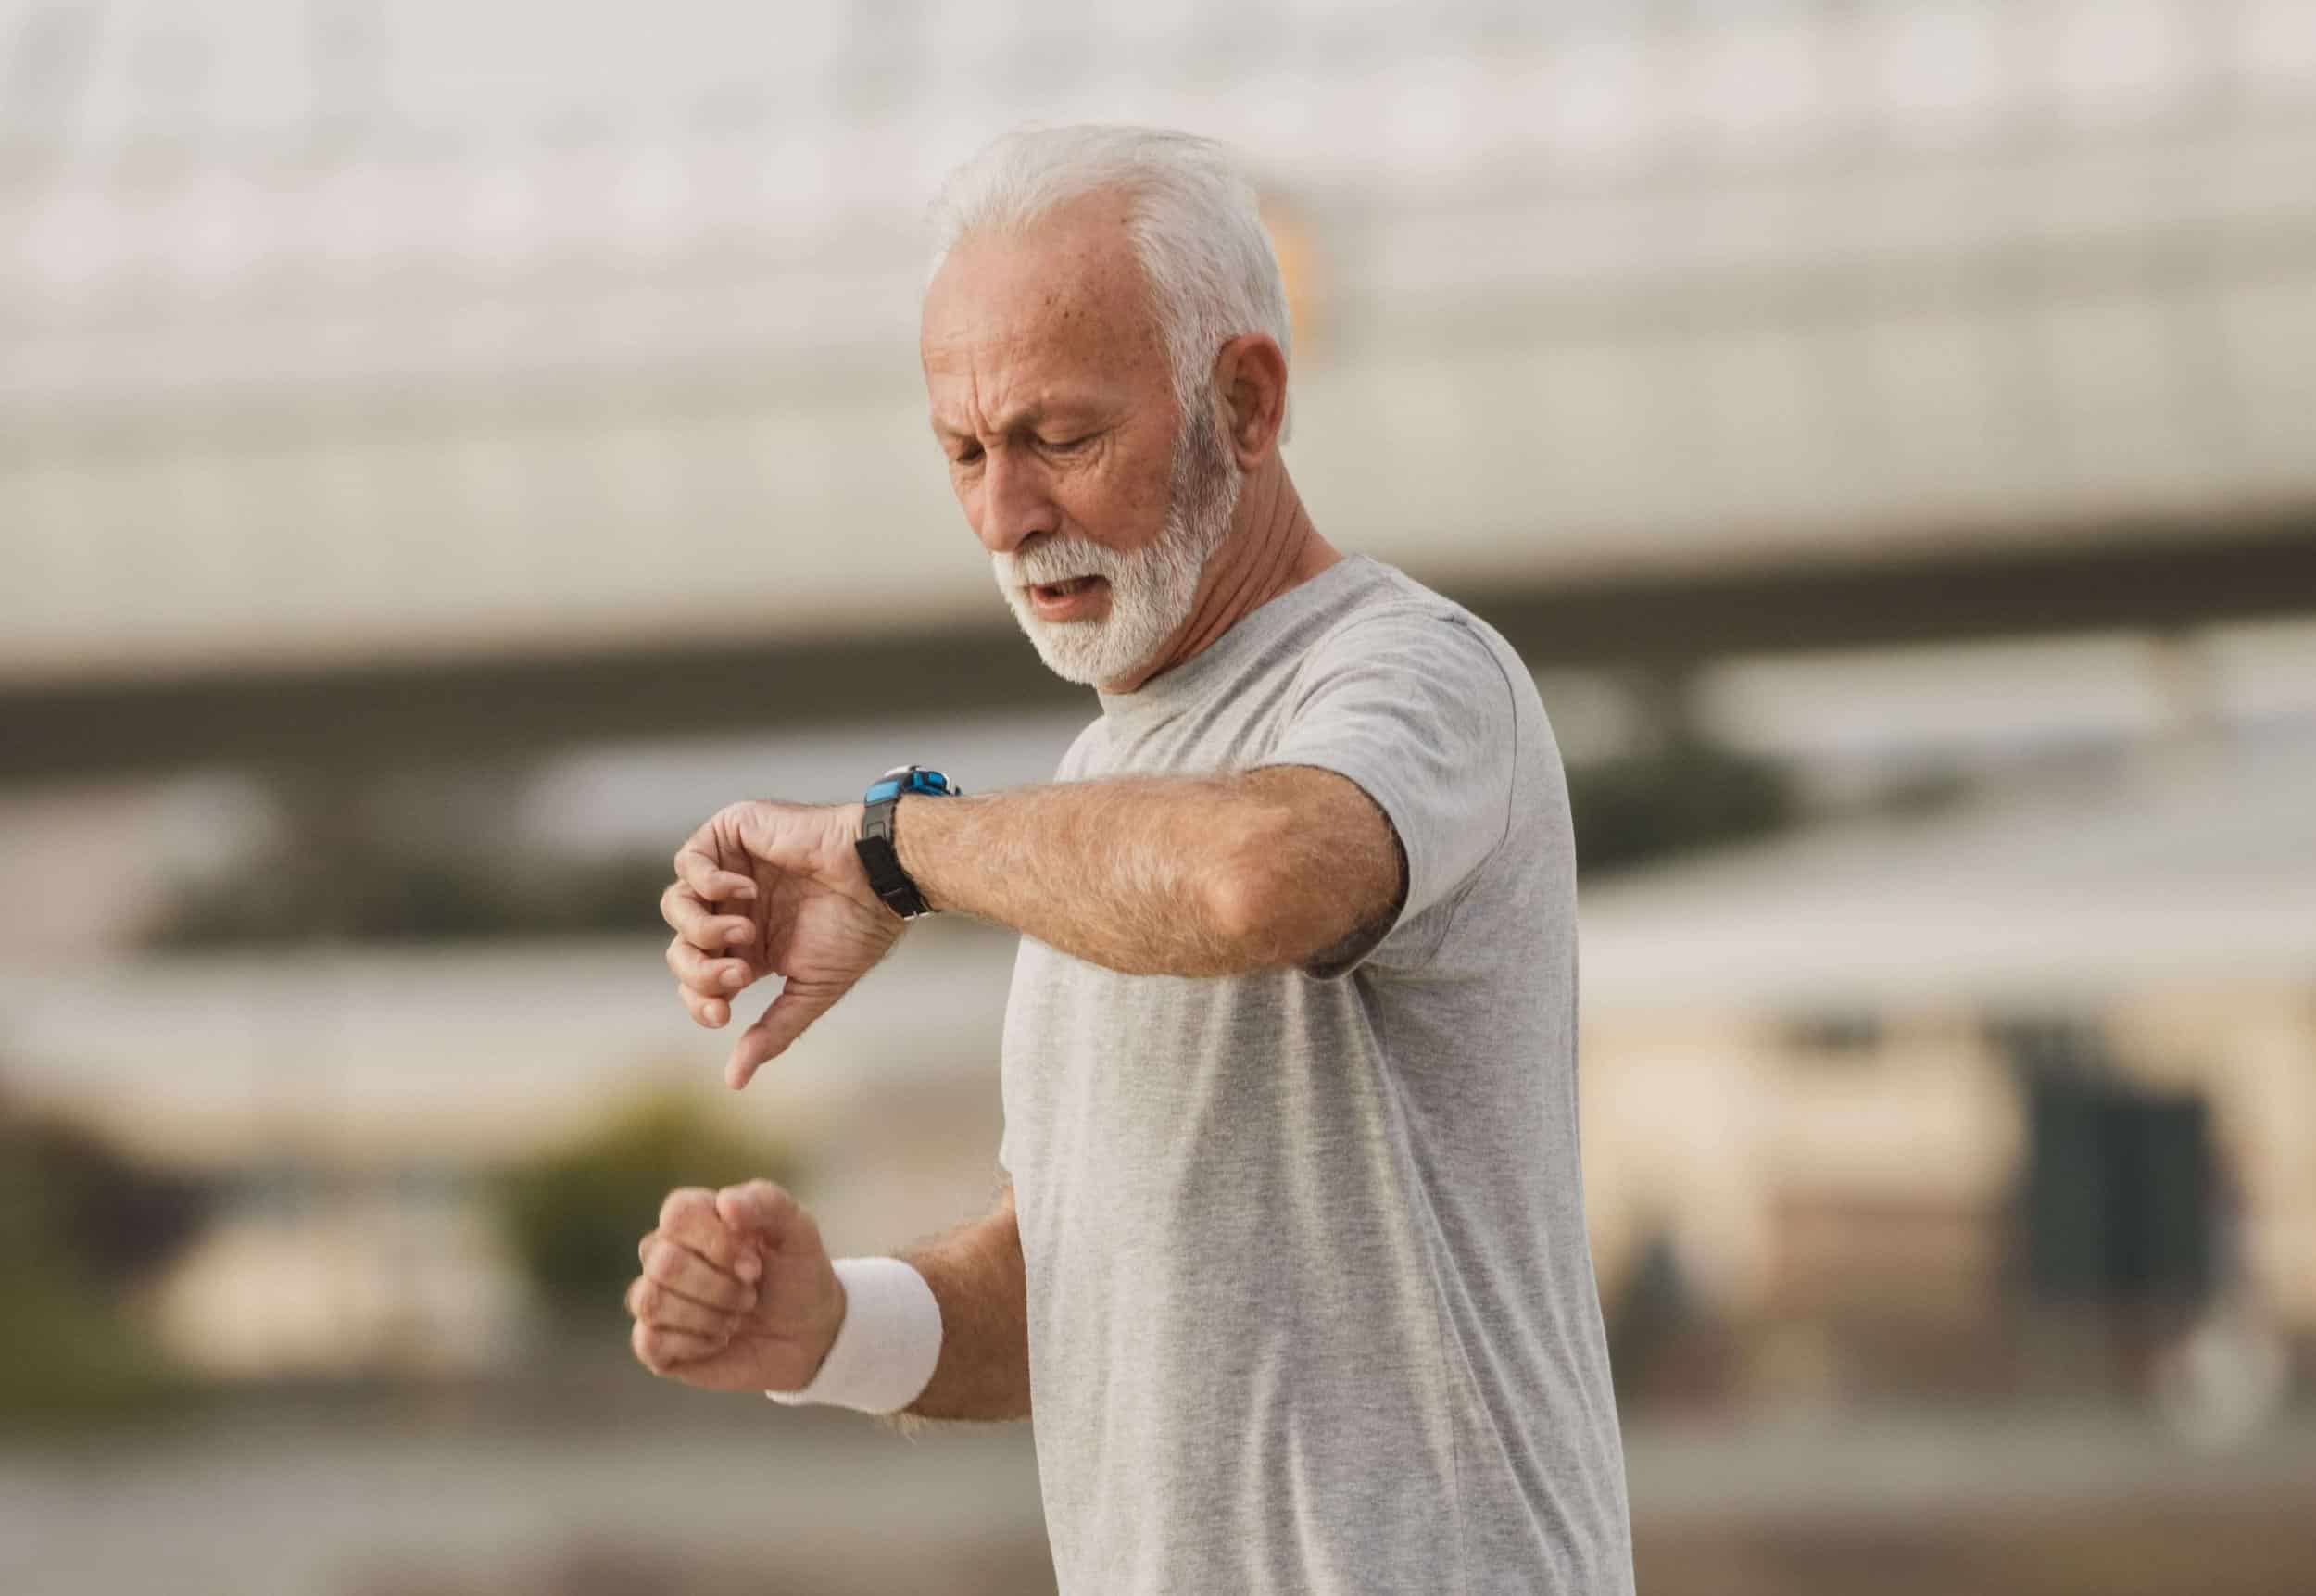 Old man running with a smartwatch as fitness tracker